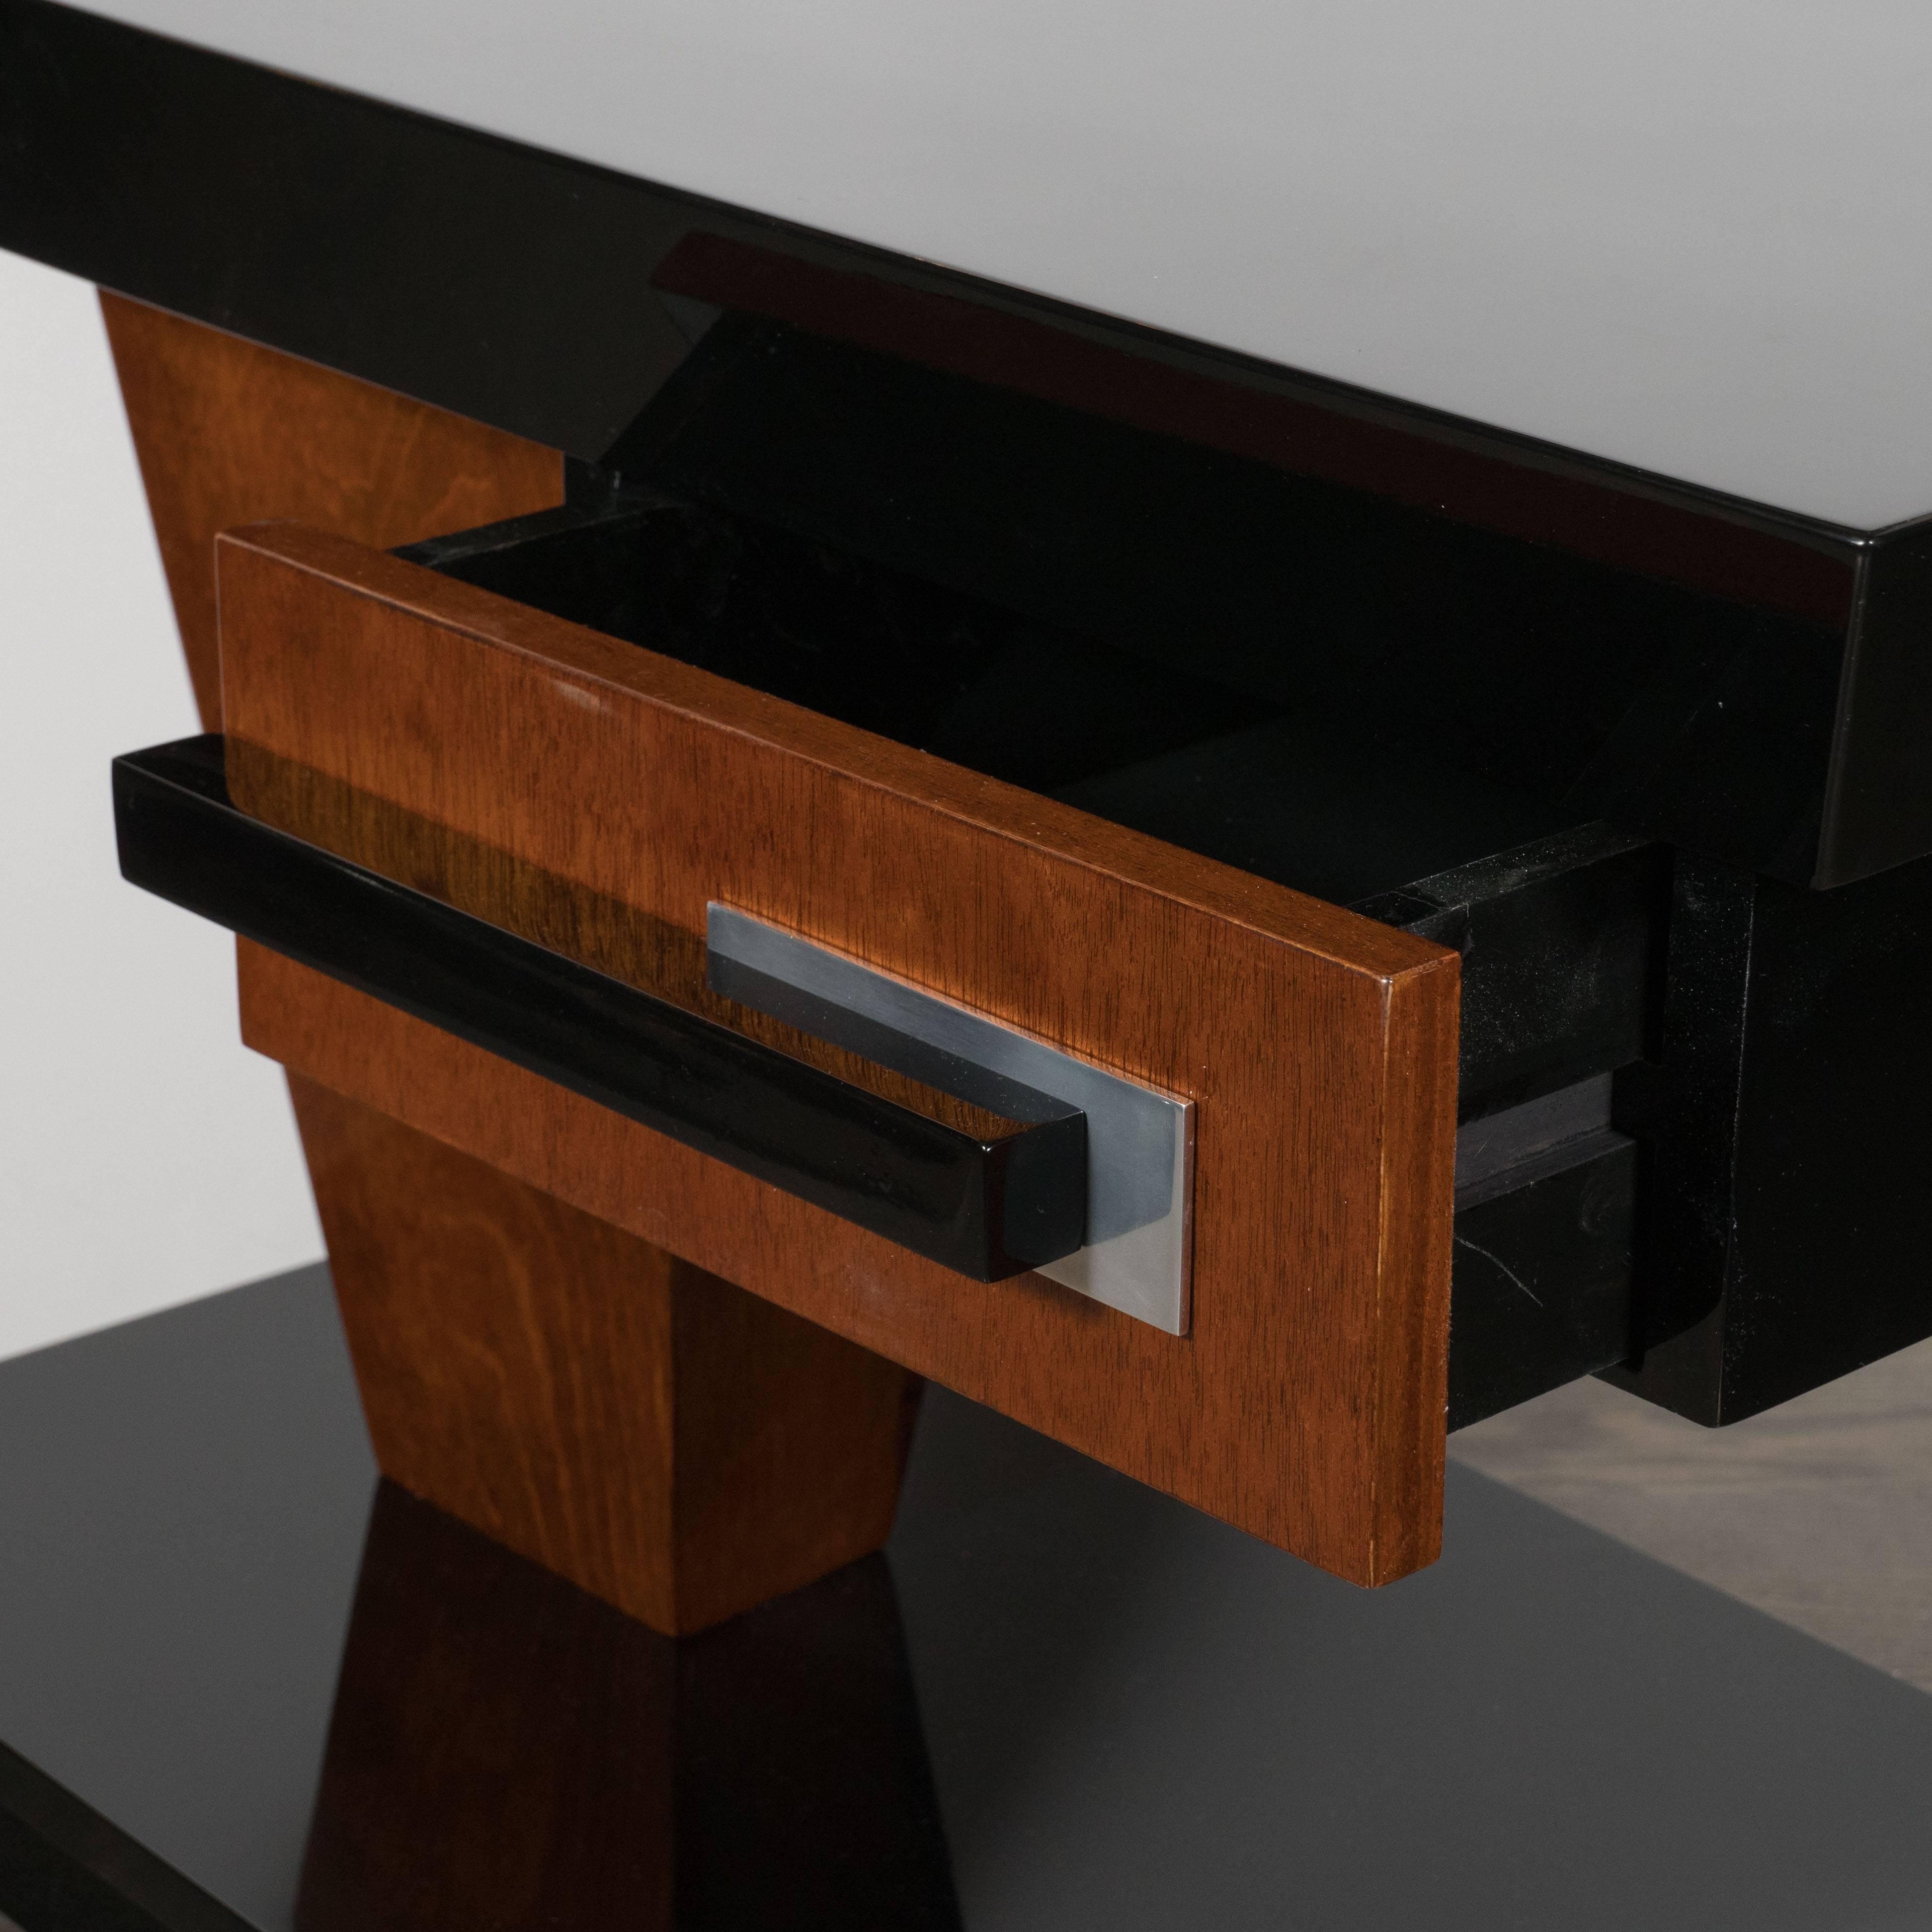 Mid-20th Century Pair of Art Deco End Tables in Black Lacquer and Burled Walnut by Donald Deskey